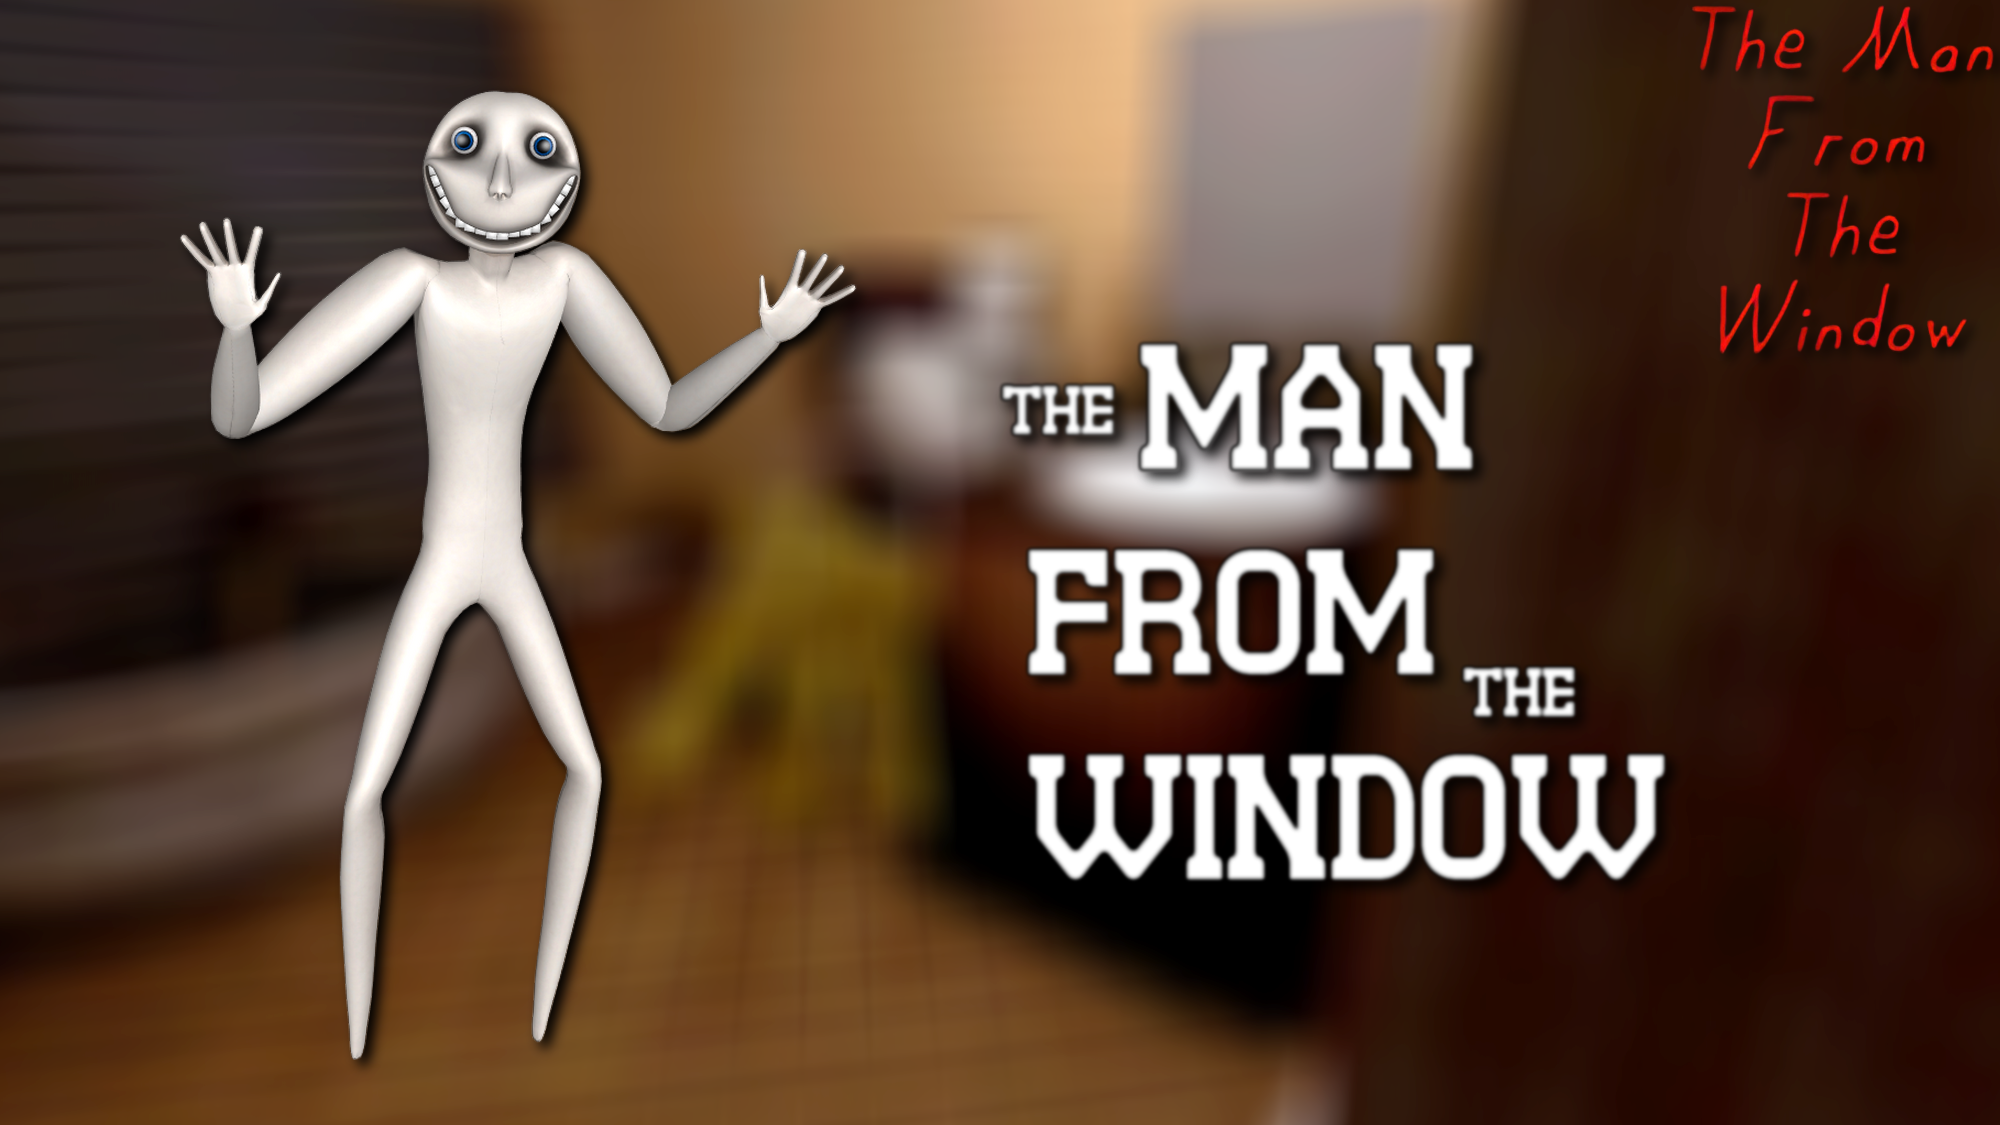 The Gaming Universe: The Man from the Window by warewolff on